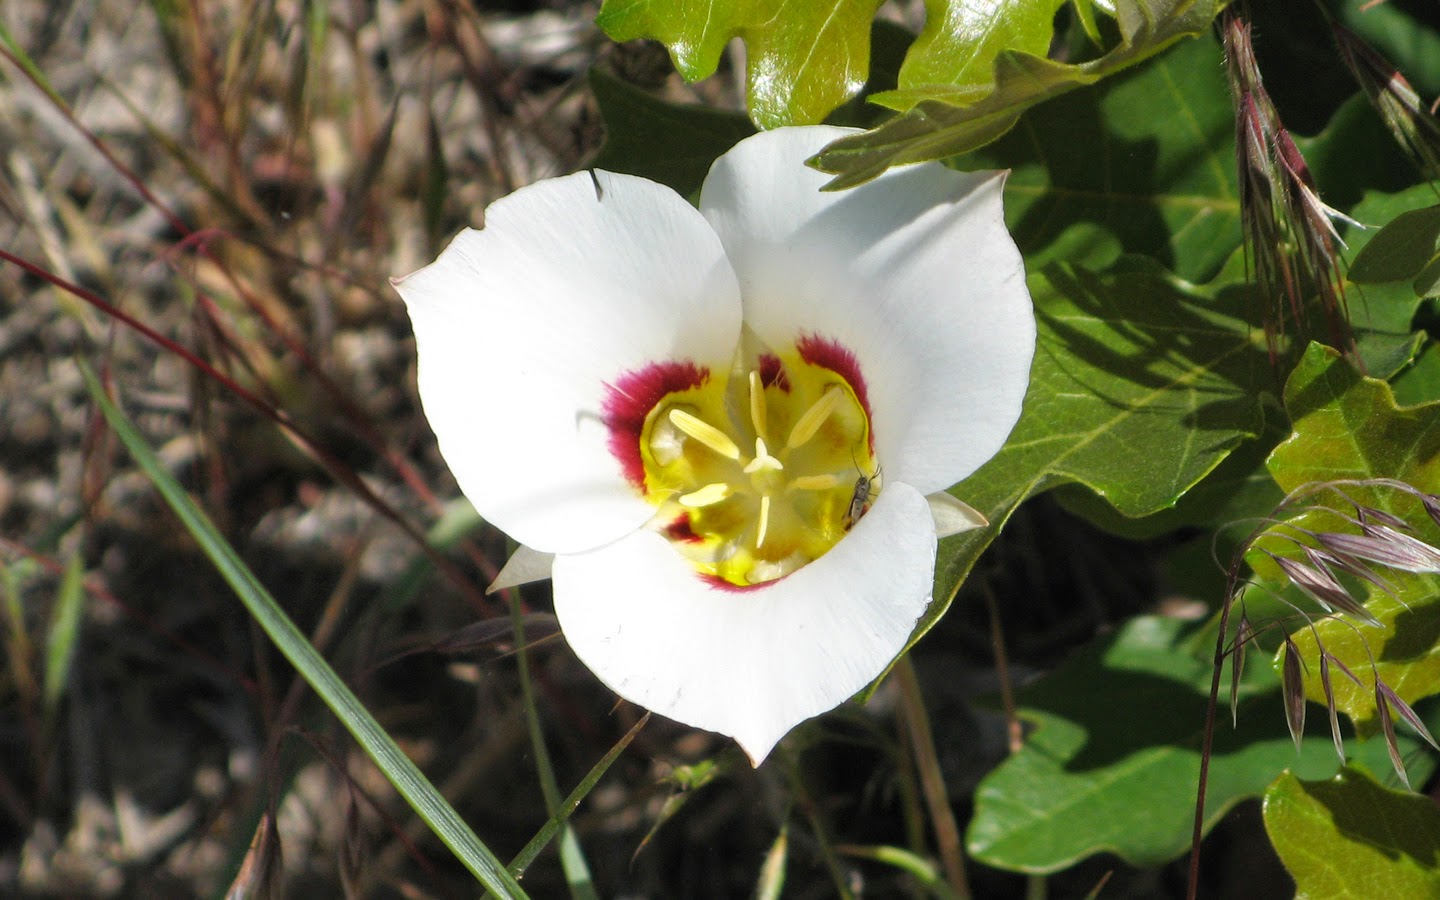 Sego Lily bloom